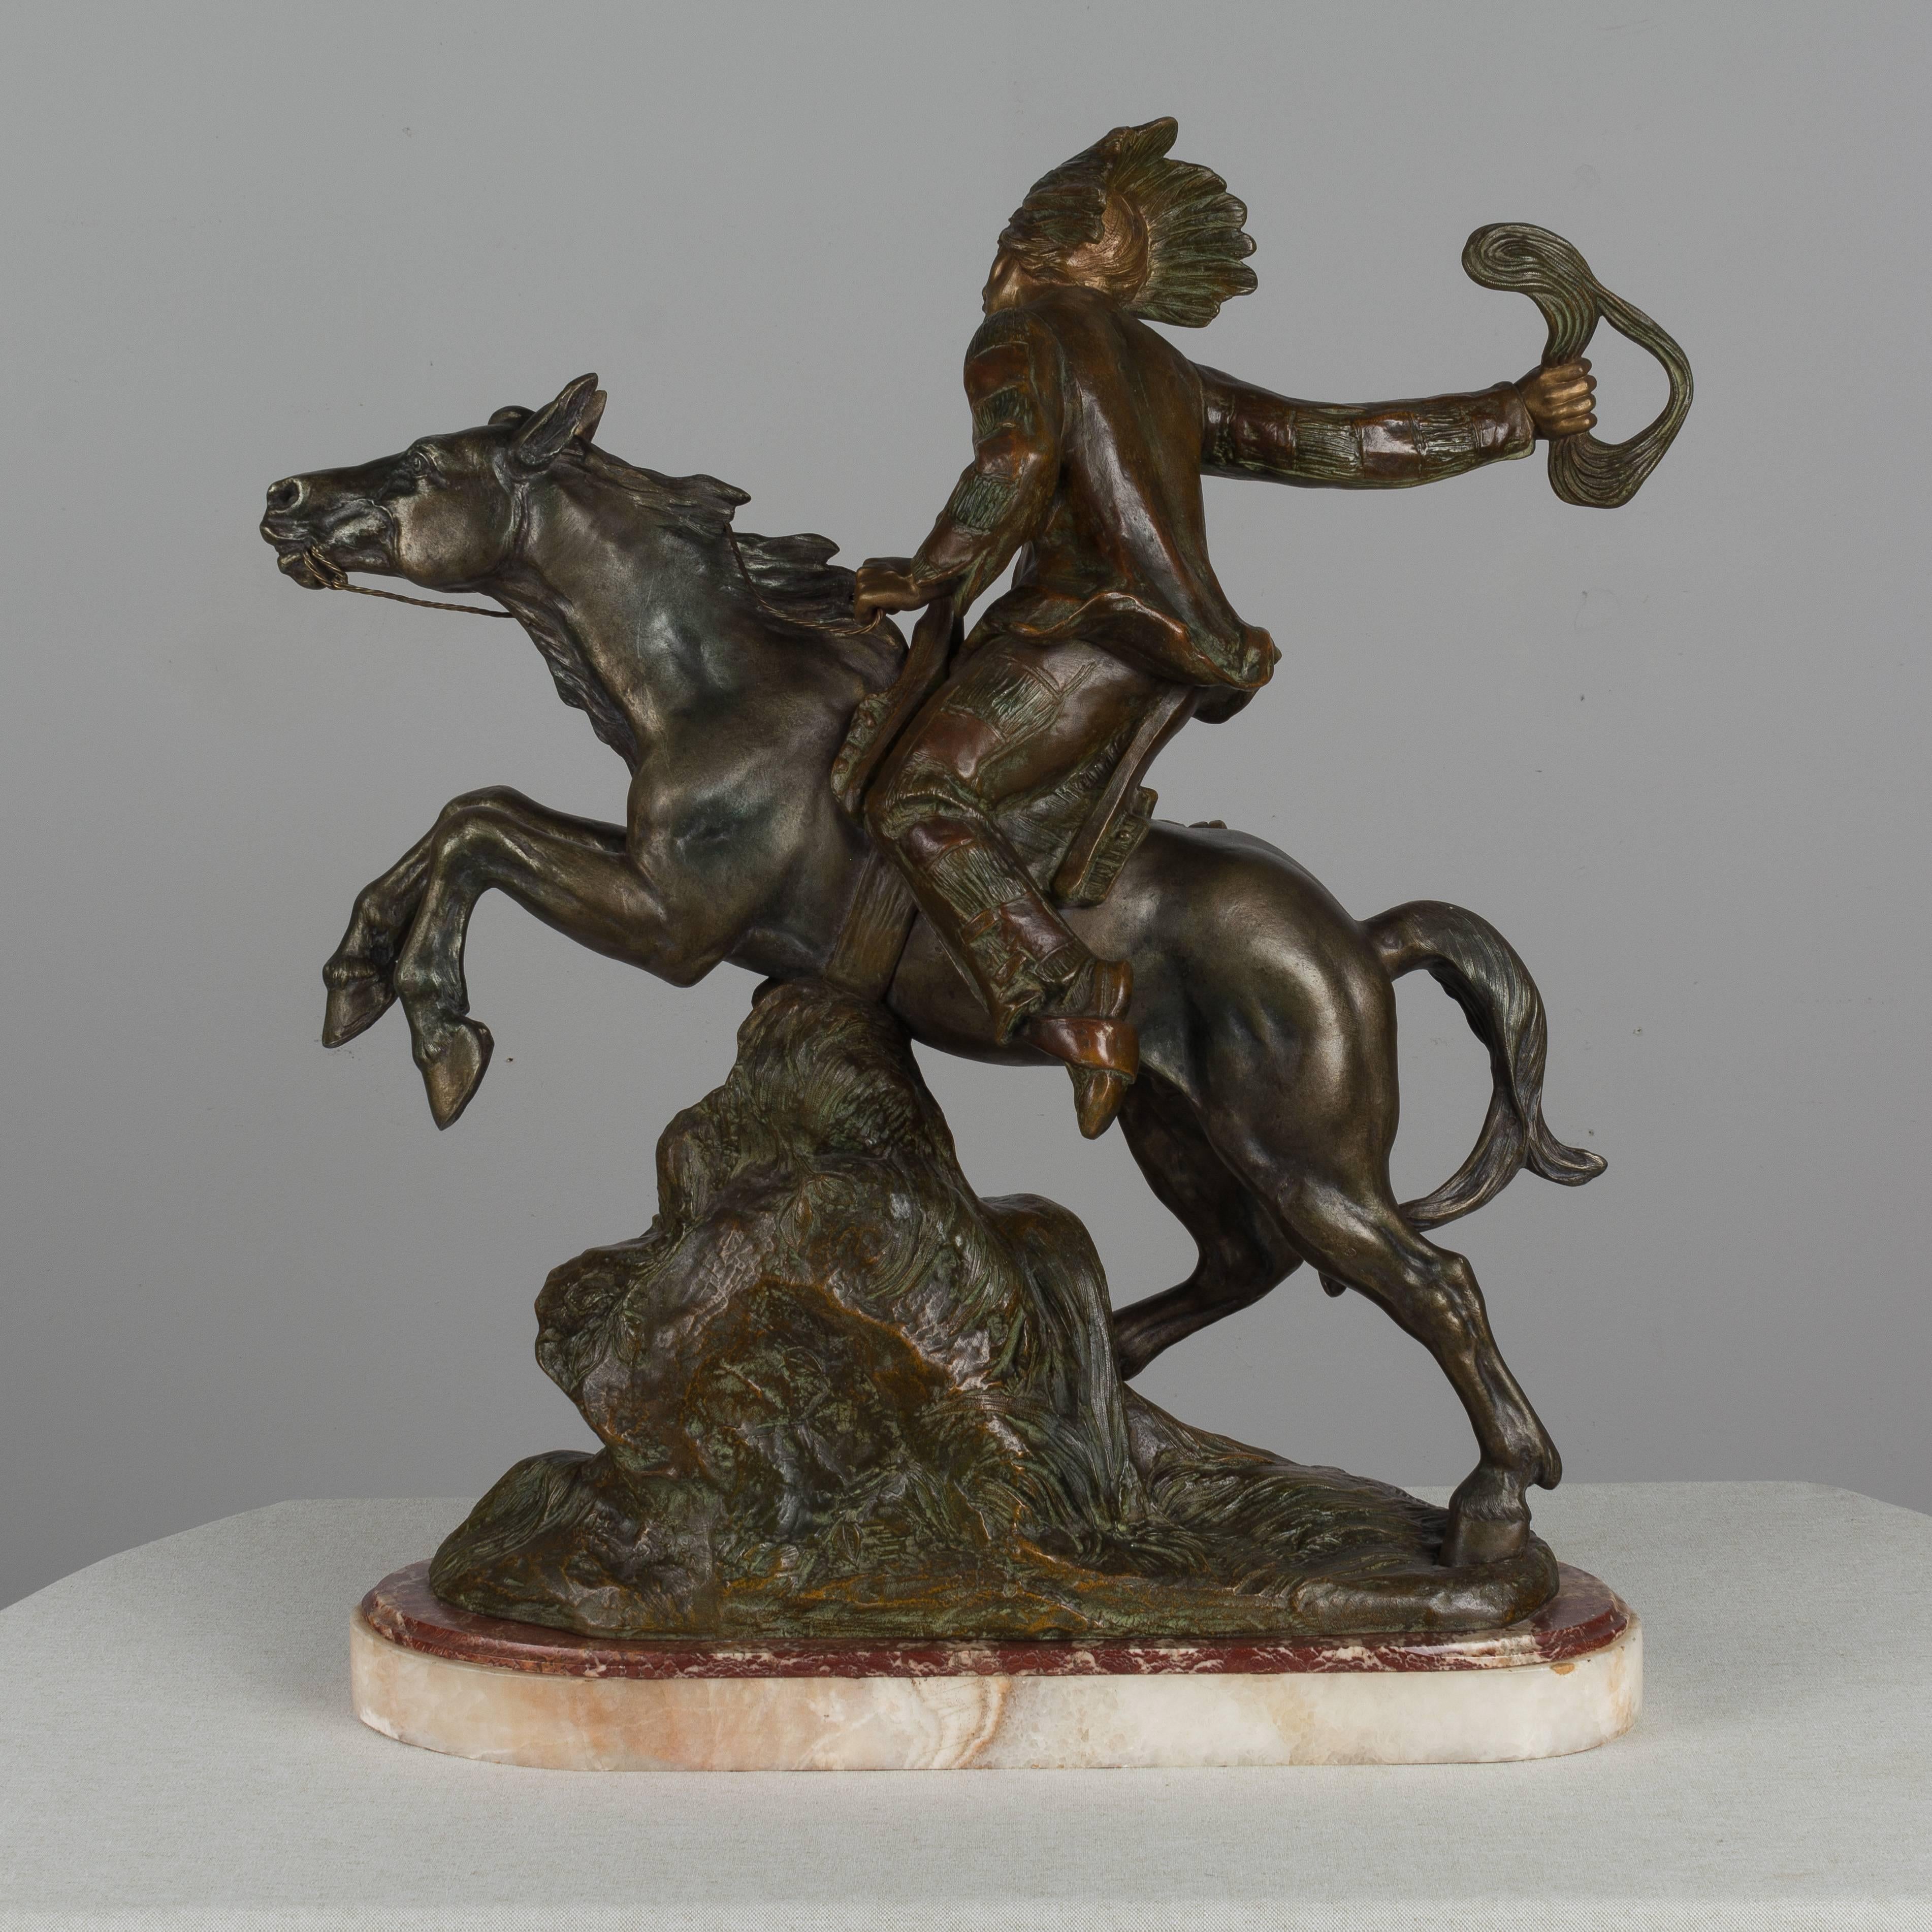 A large metal sculpture of a Native American man riding a galloping horse. Entitled 